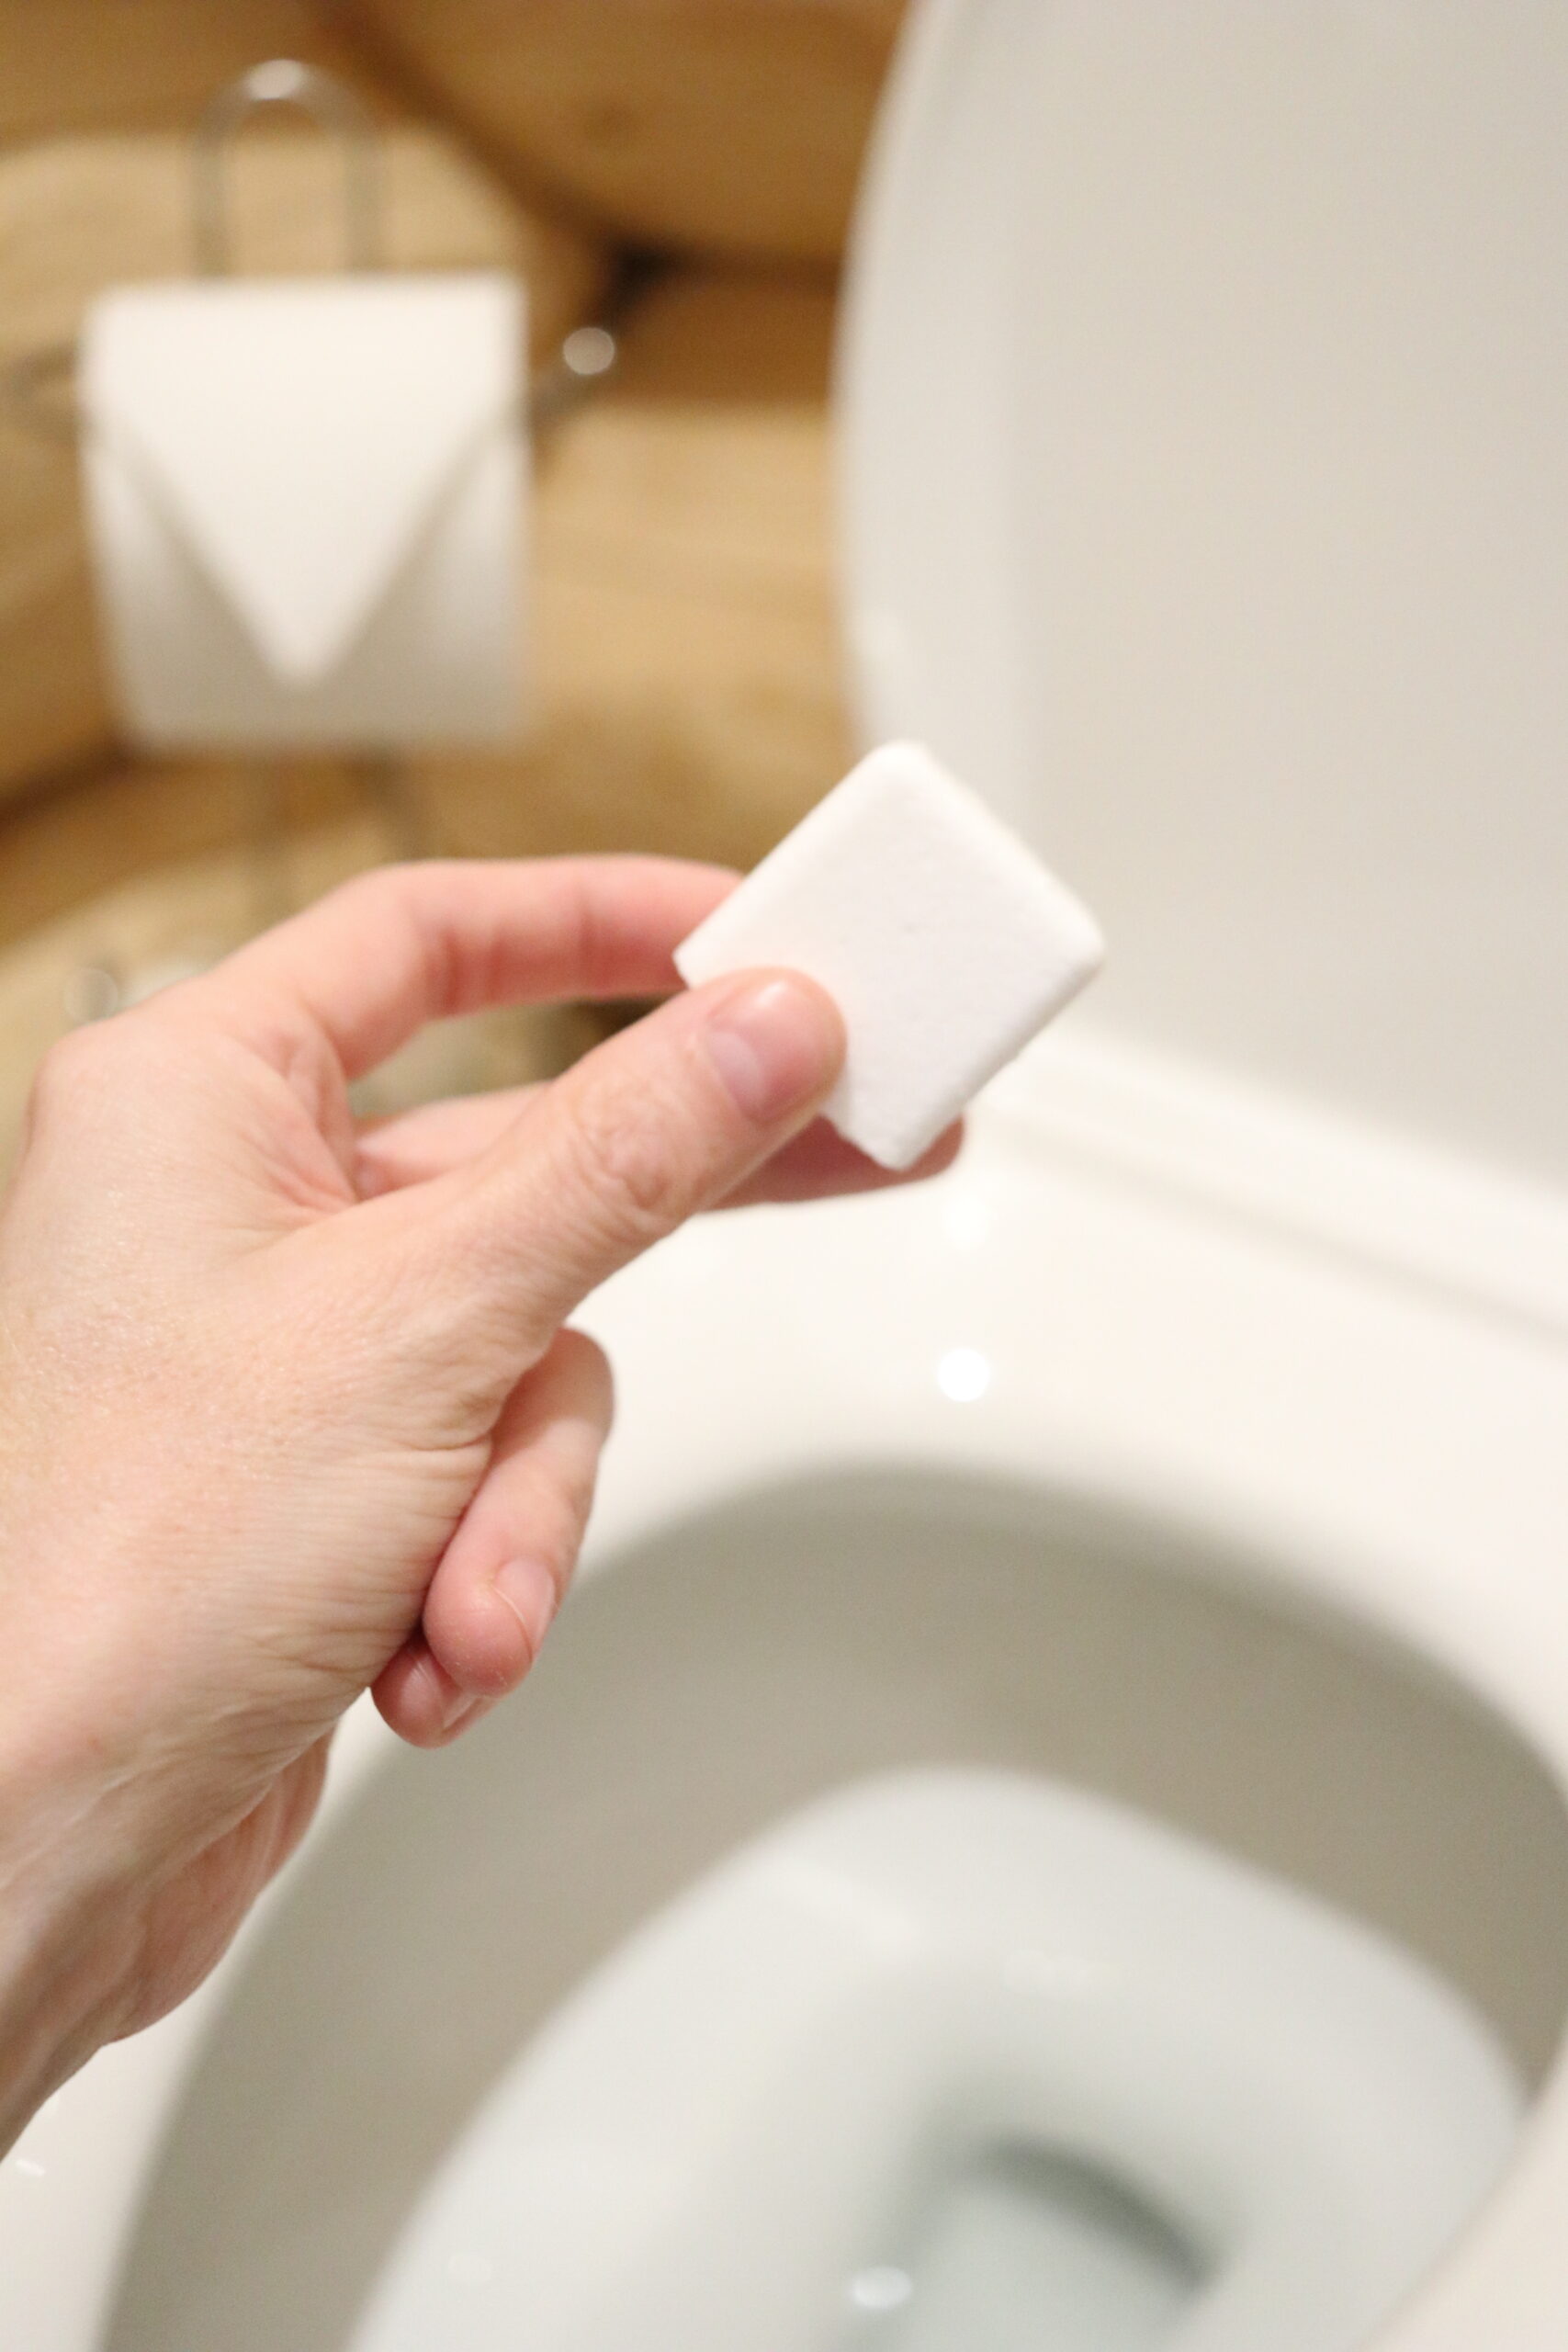 A womans hand is holding a white DIY toilet bowl cleaner tablet. The tablet is made from natural ingredients.